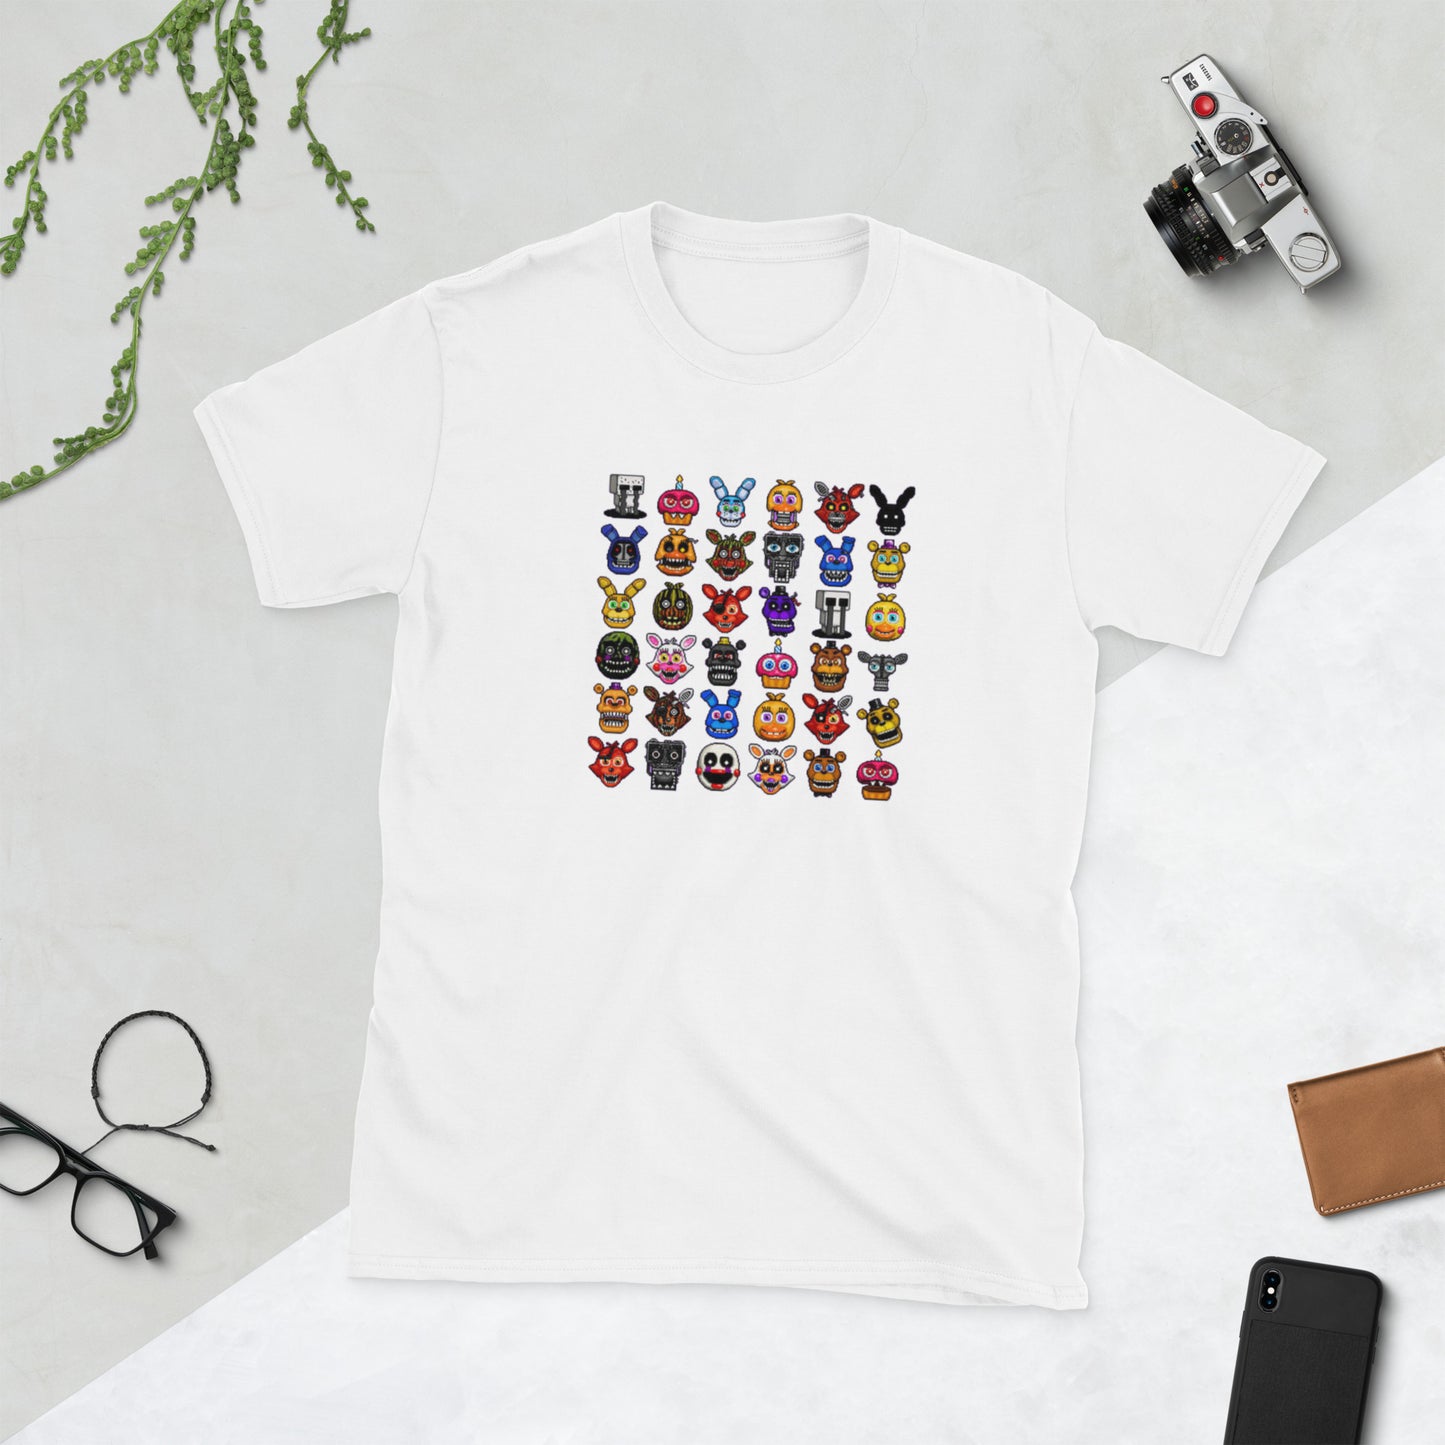 FNAF Pixel Art Short-Sleeve Unisex T-Shirt | Five night's at Freddy's Characters